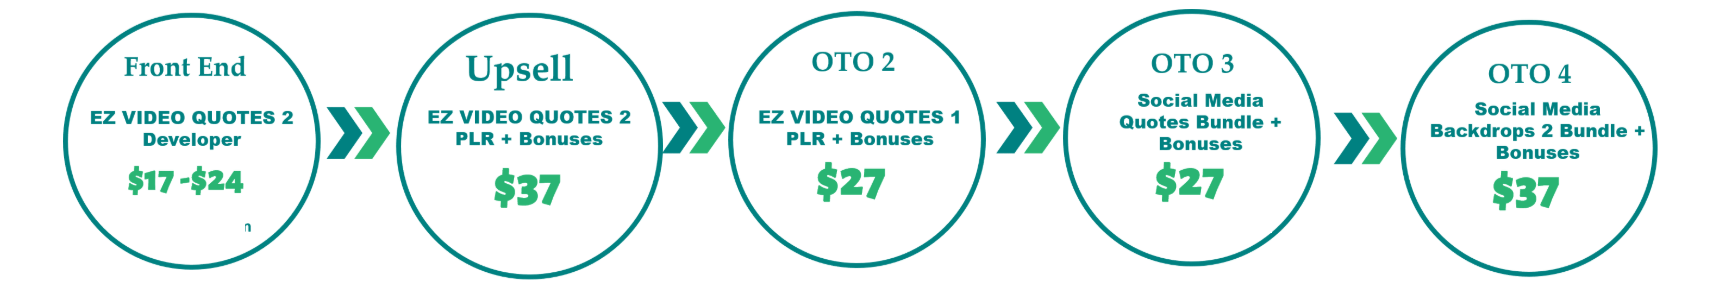 Ez Video Quotes 2 Review Bonus All Infors That You Need